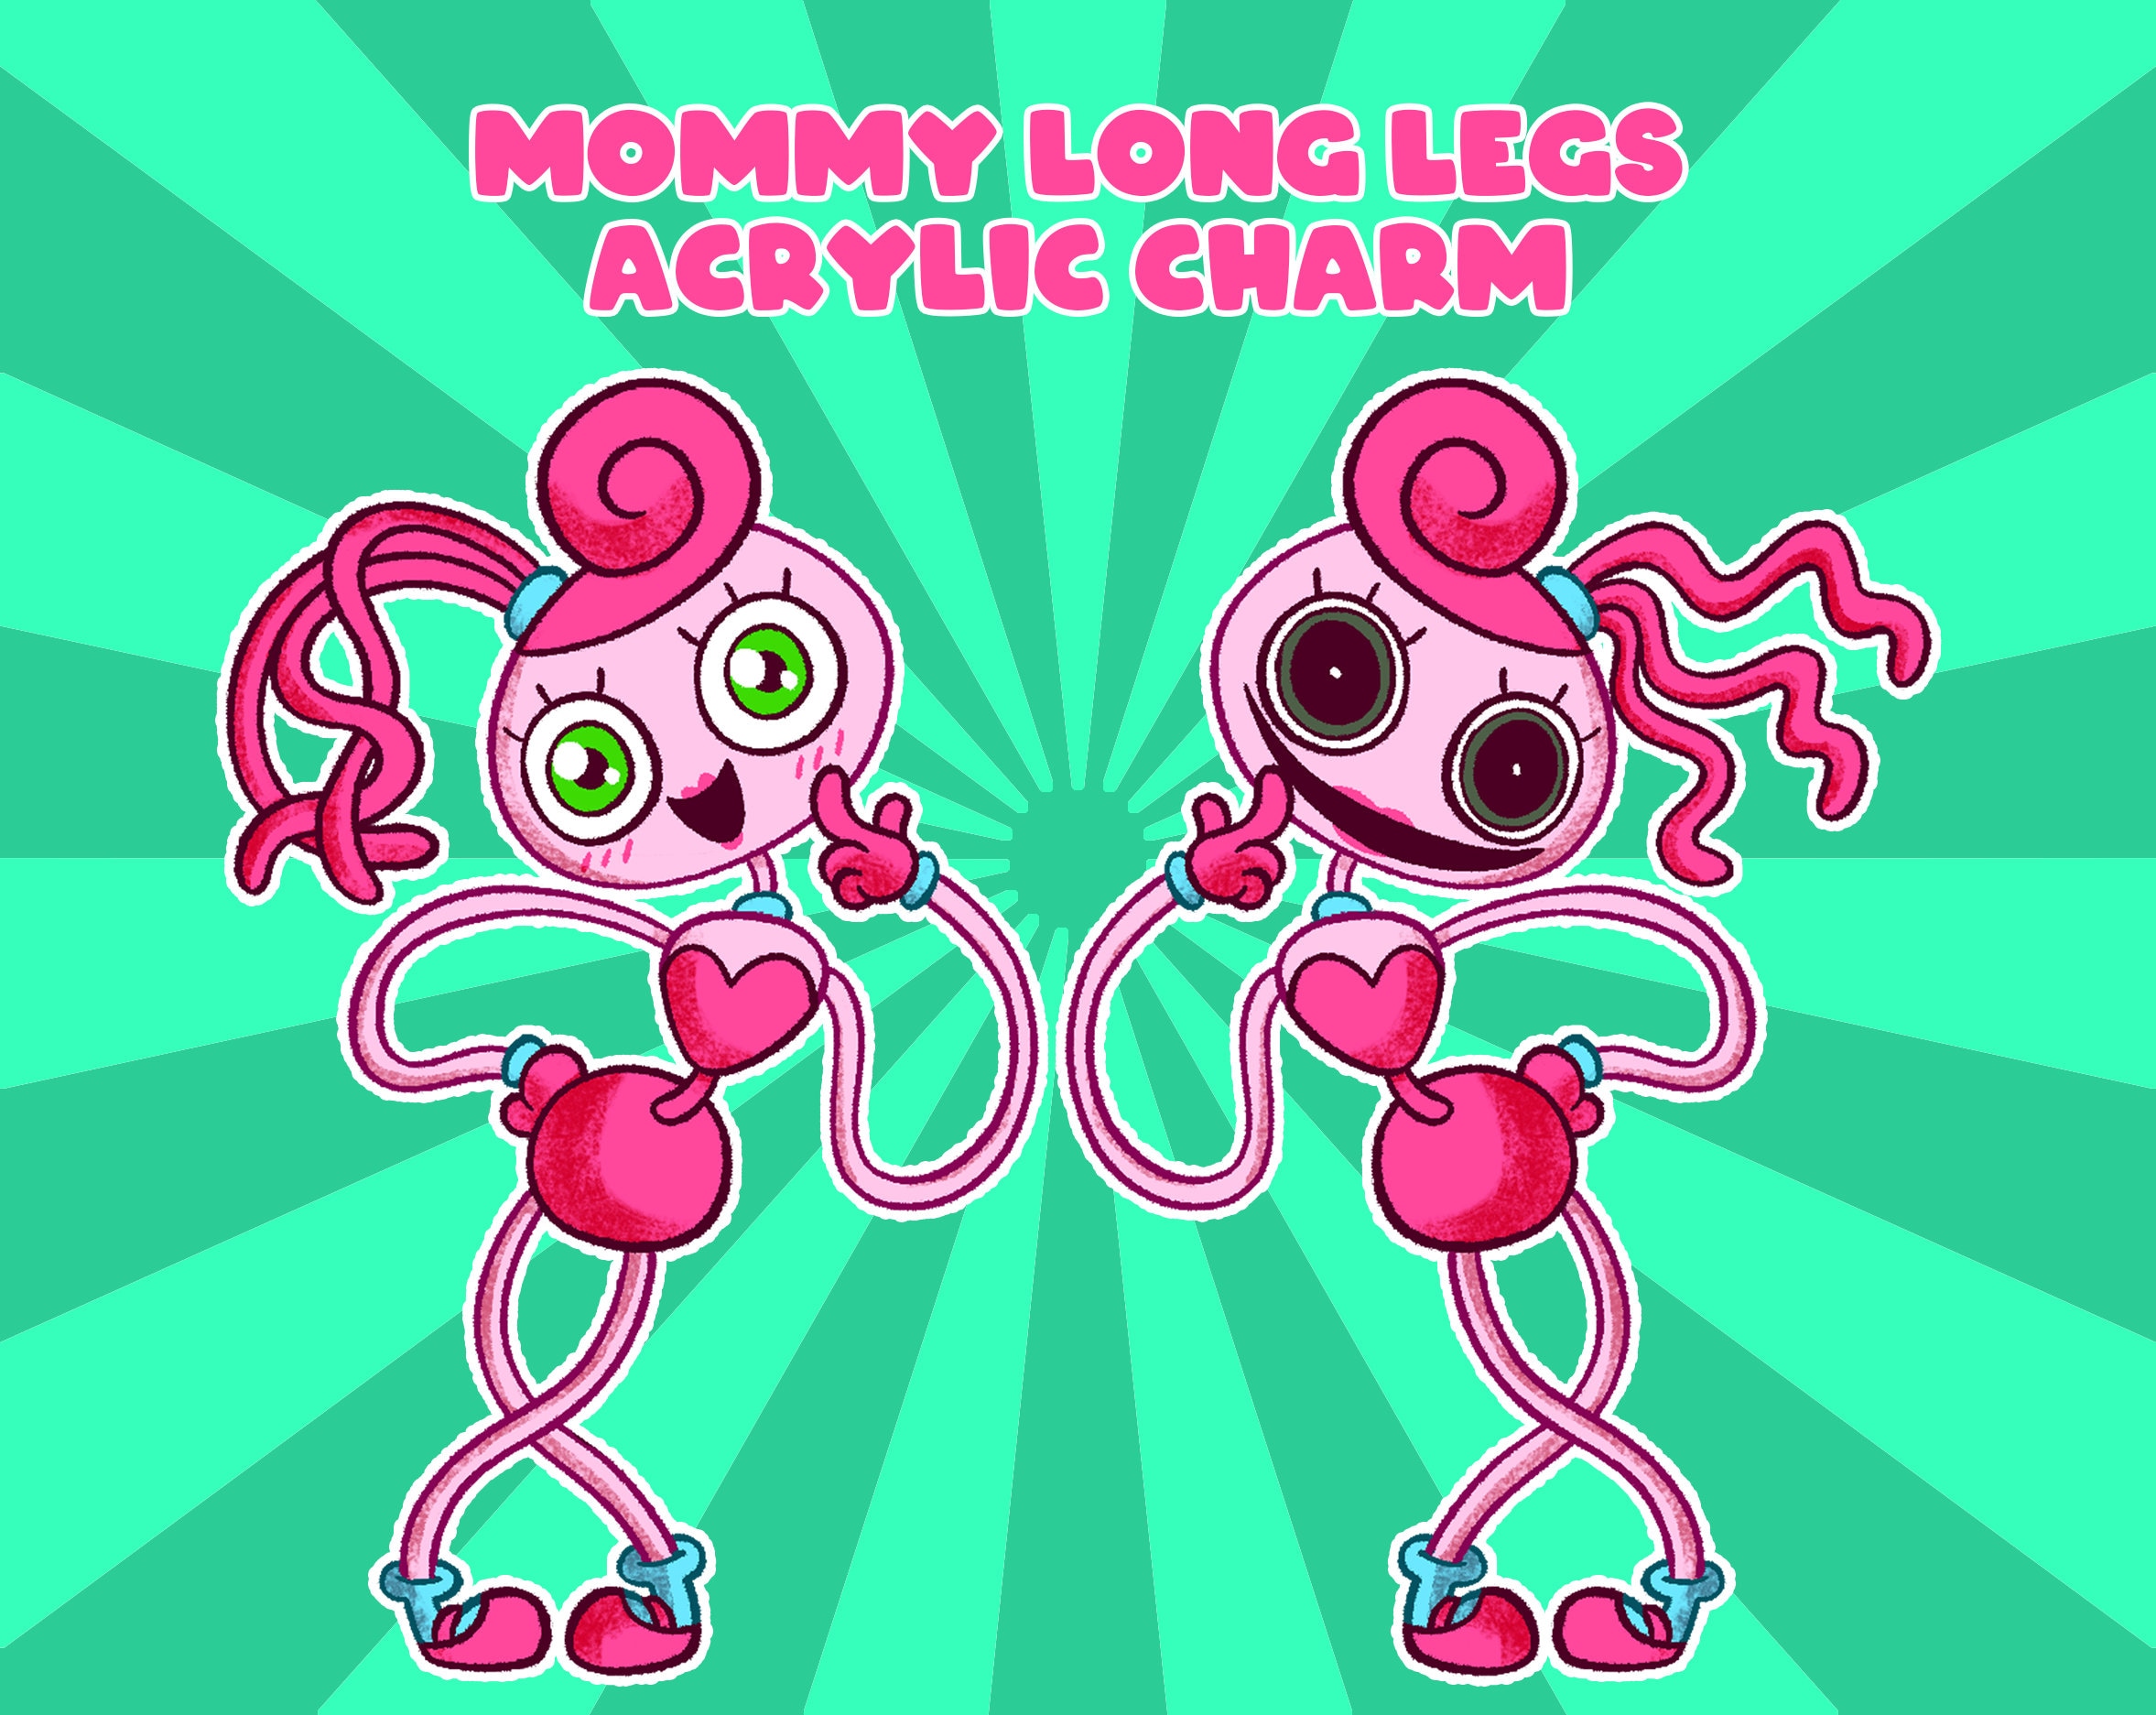 Mommy Long Legs Gifts & Merchandise for Sale